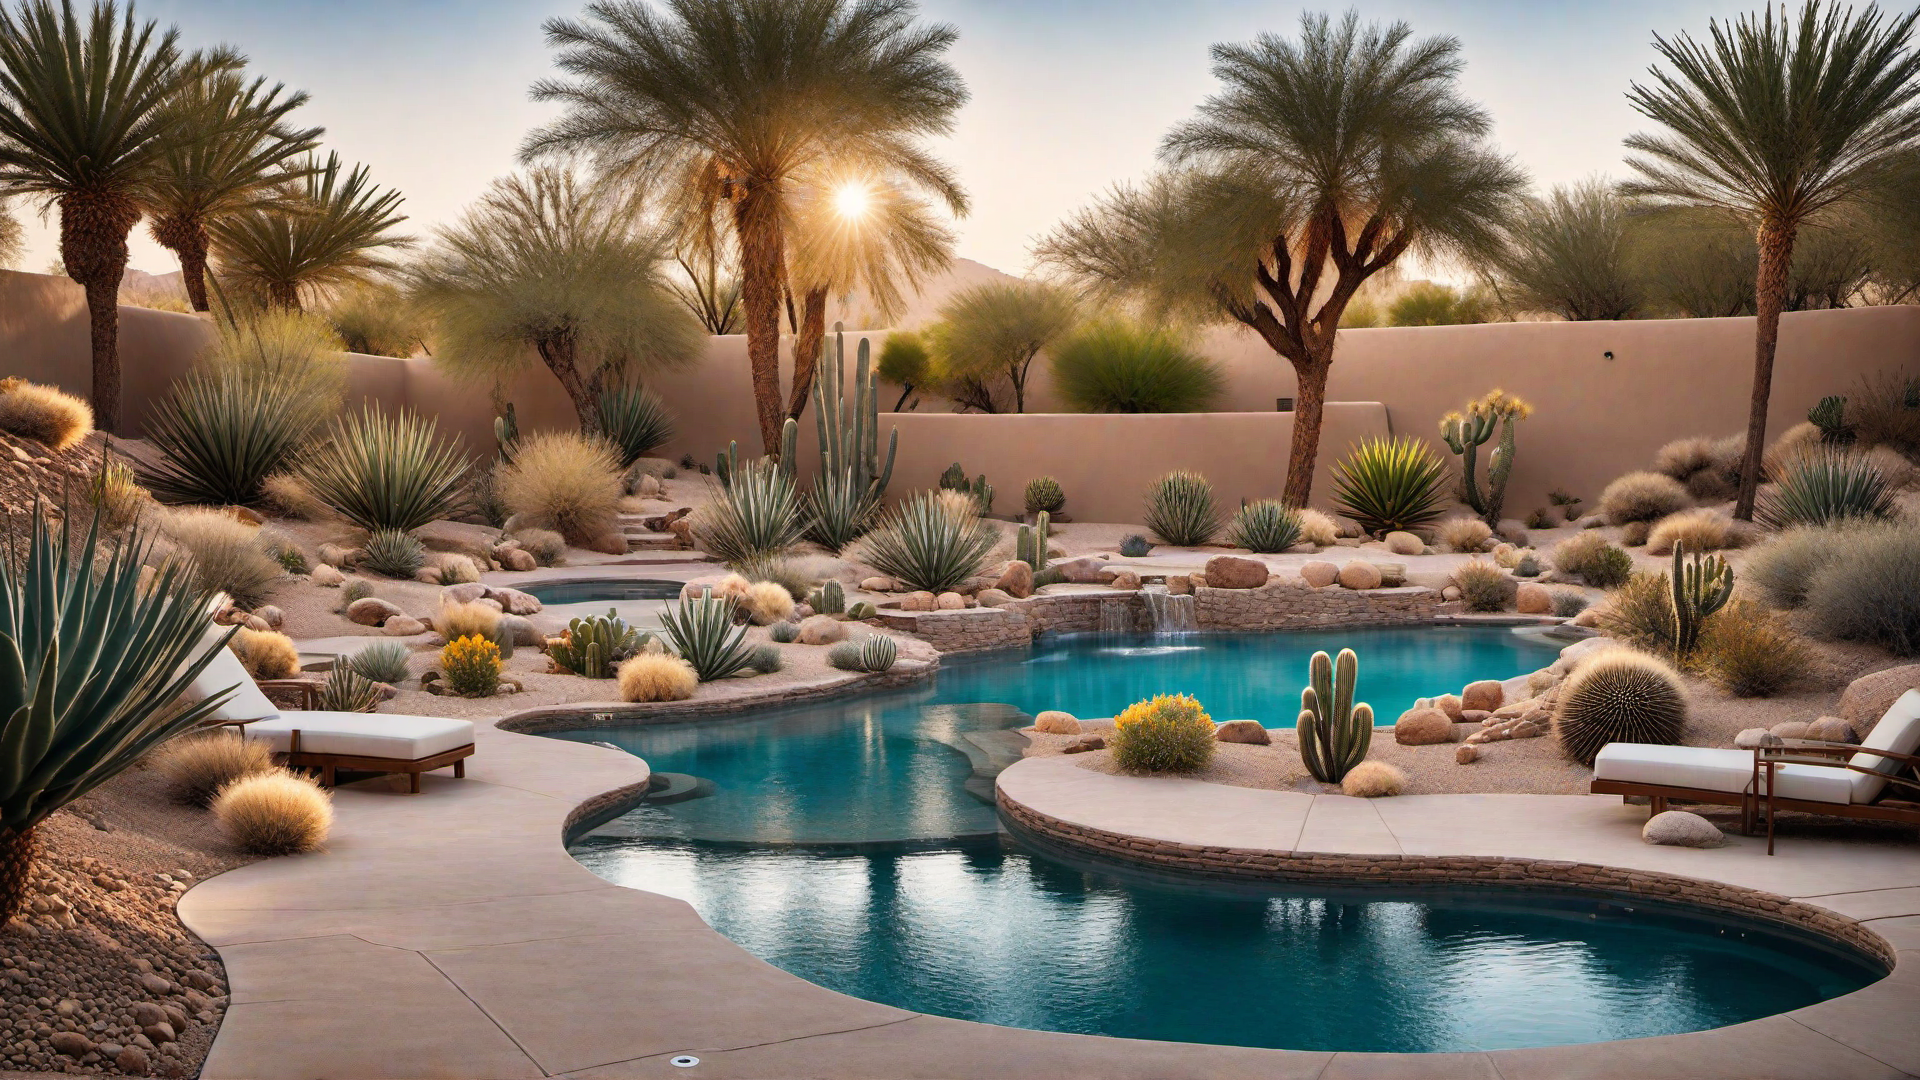 Desert Oasis: Pool with Cacti and Dry Landscaping